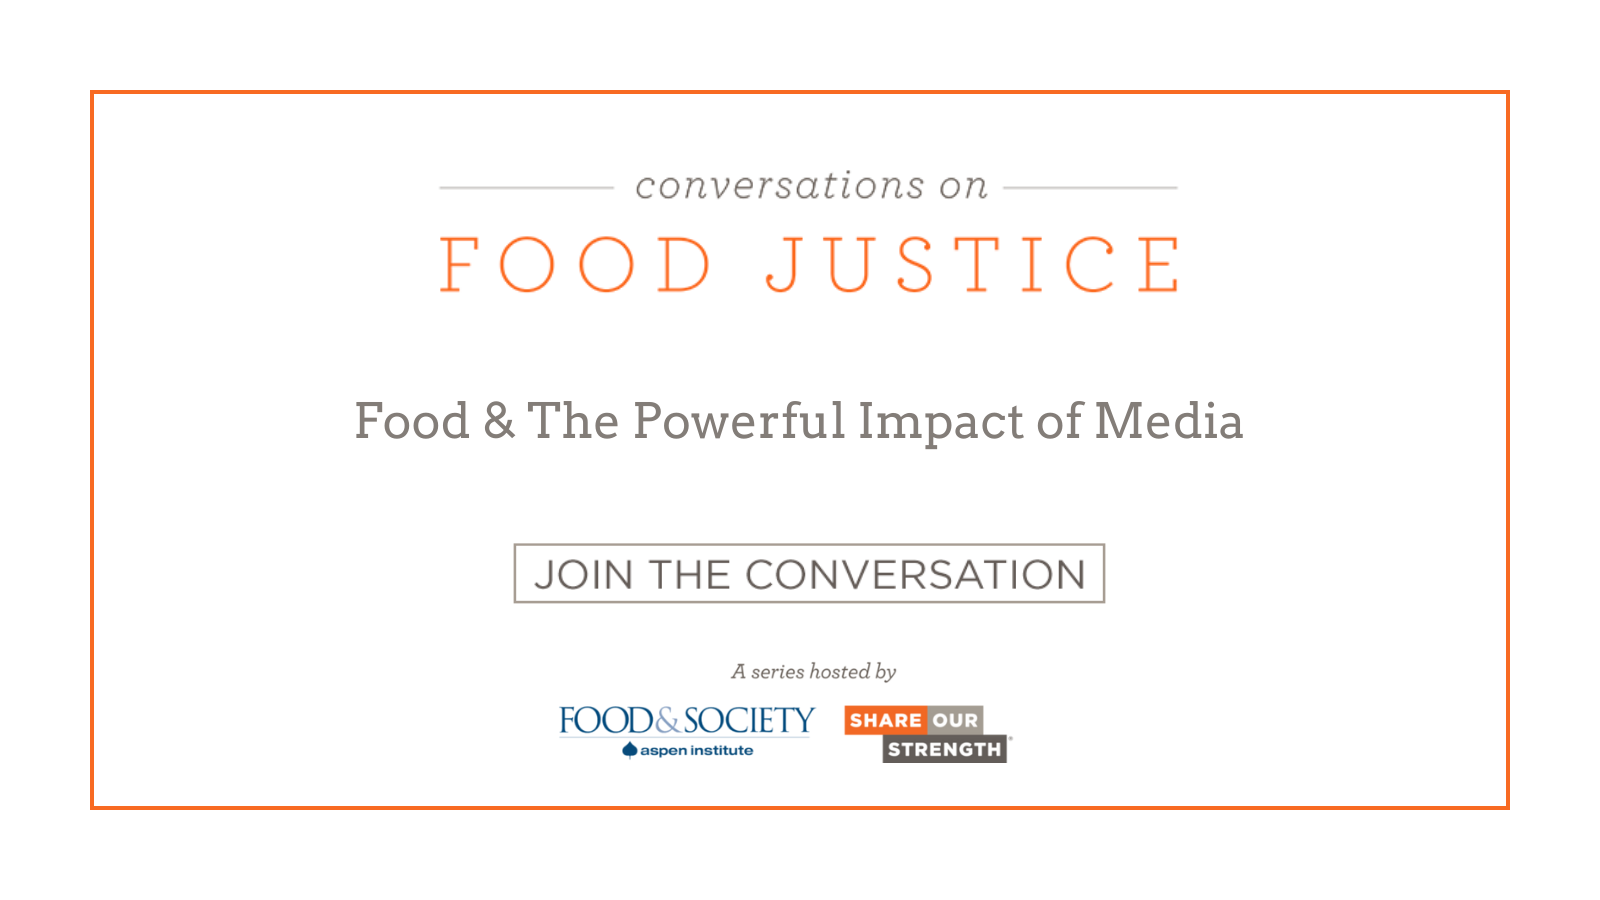 Conversations on Food Justice Food & The Powerful Impact of Media Join the Conversation A series hosted by Food & Society at the Aspen Institute and Share Our Strength